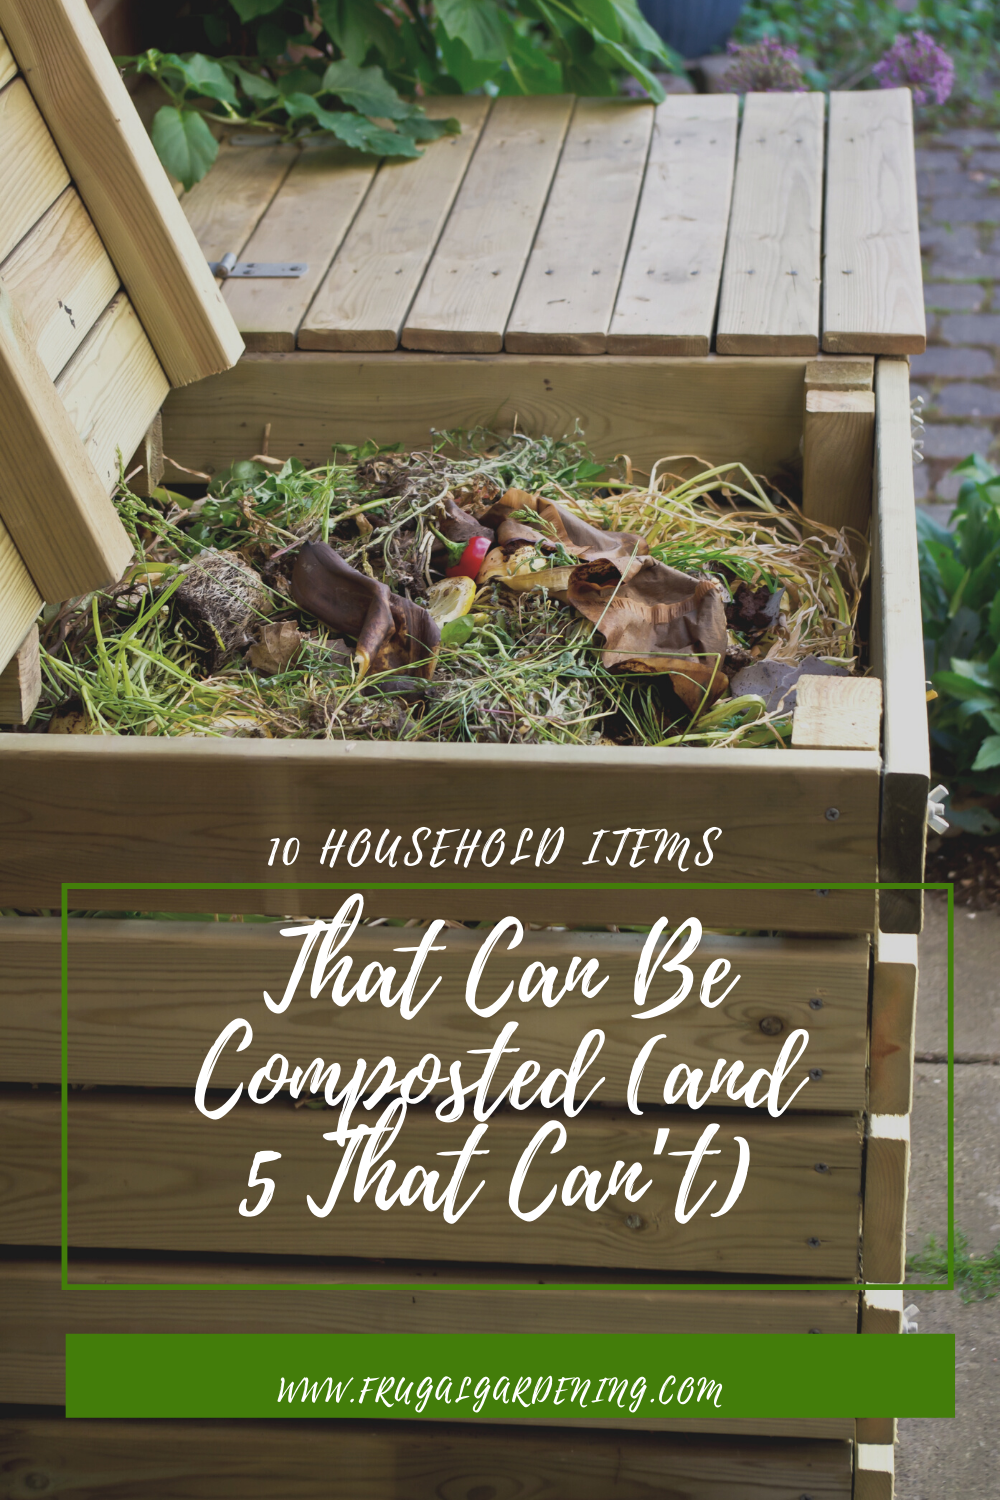 10 Household Items That Can Be Composted (and 5 That Can’t)